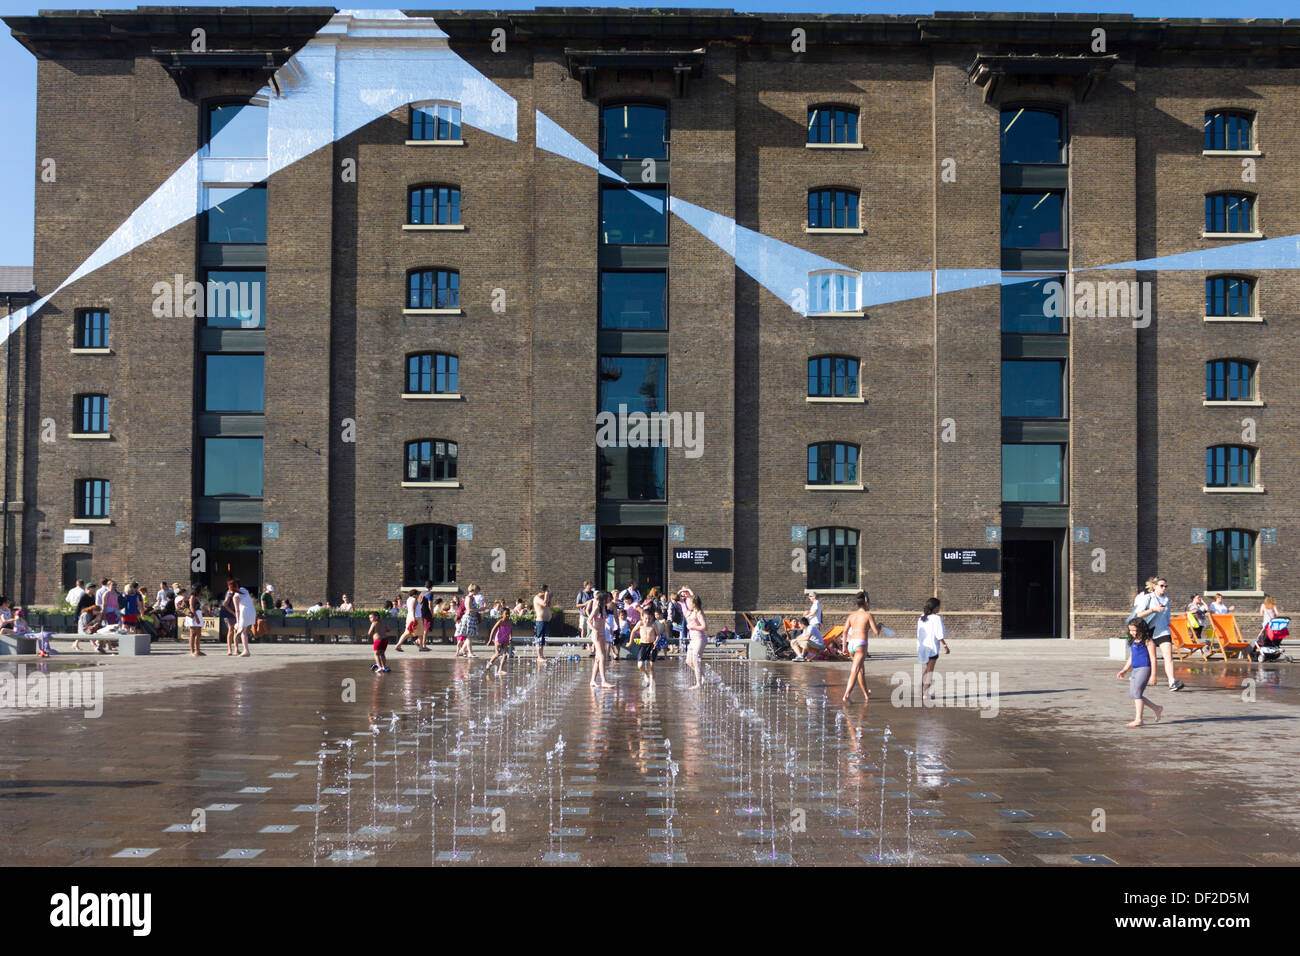 University of Arts - Central St Martins Campus - Kings Cross Central - London Stock Photo